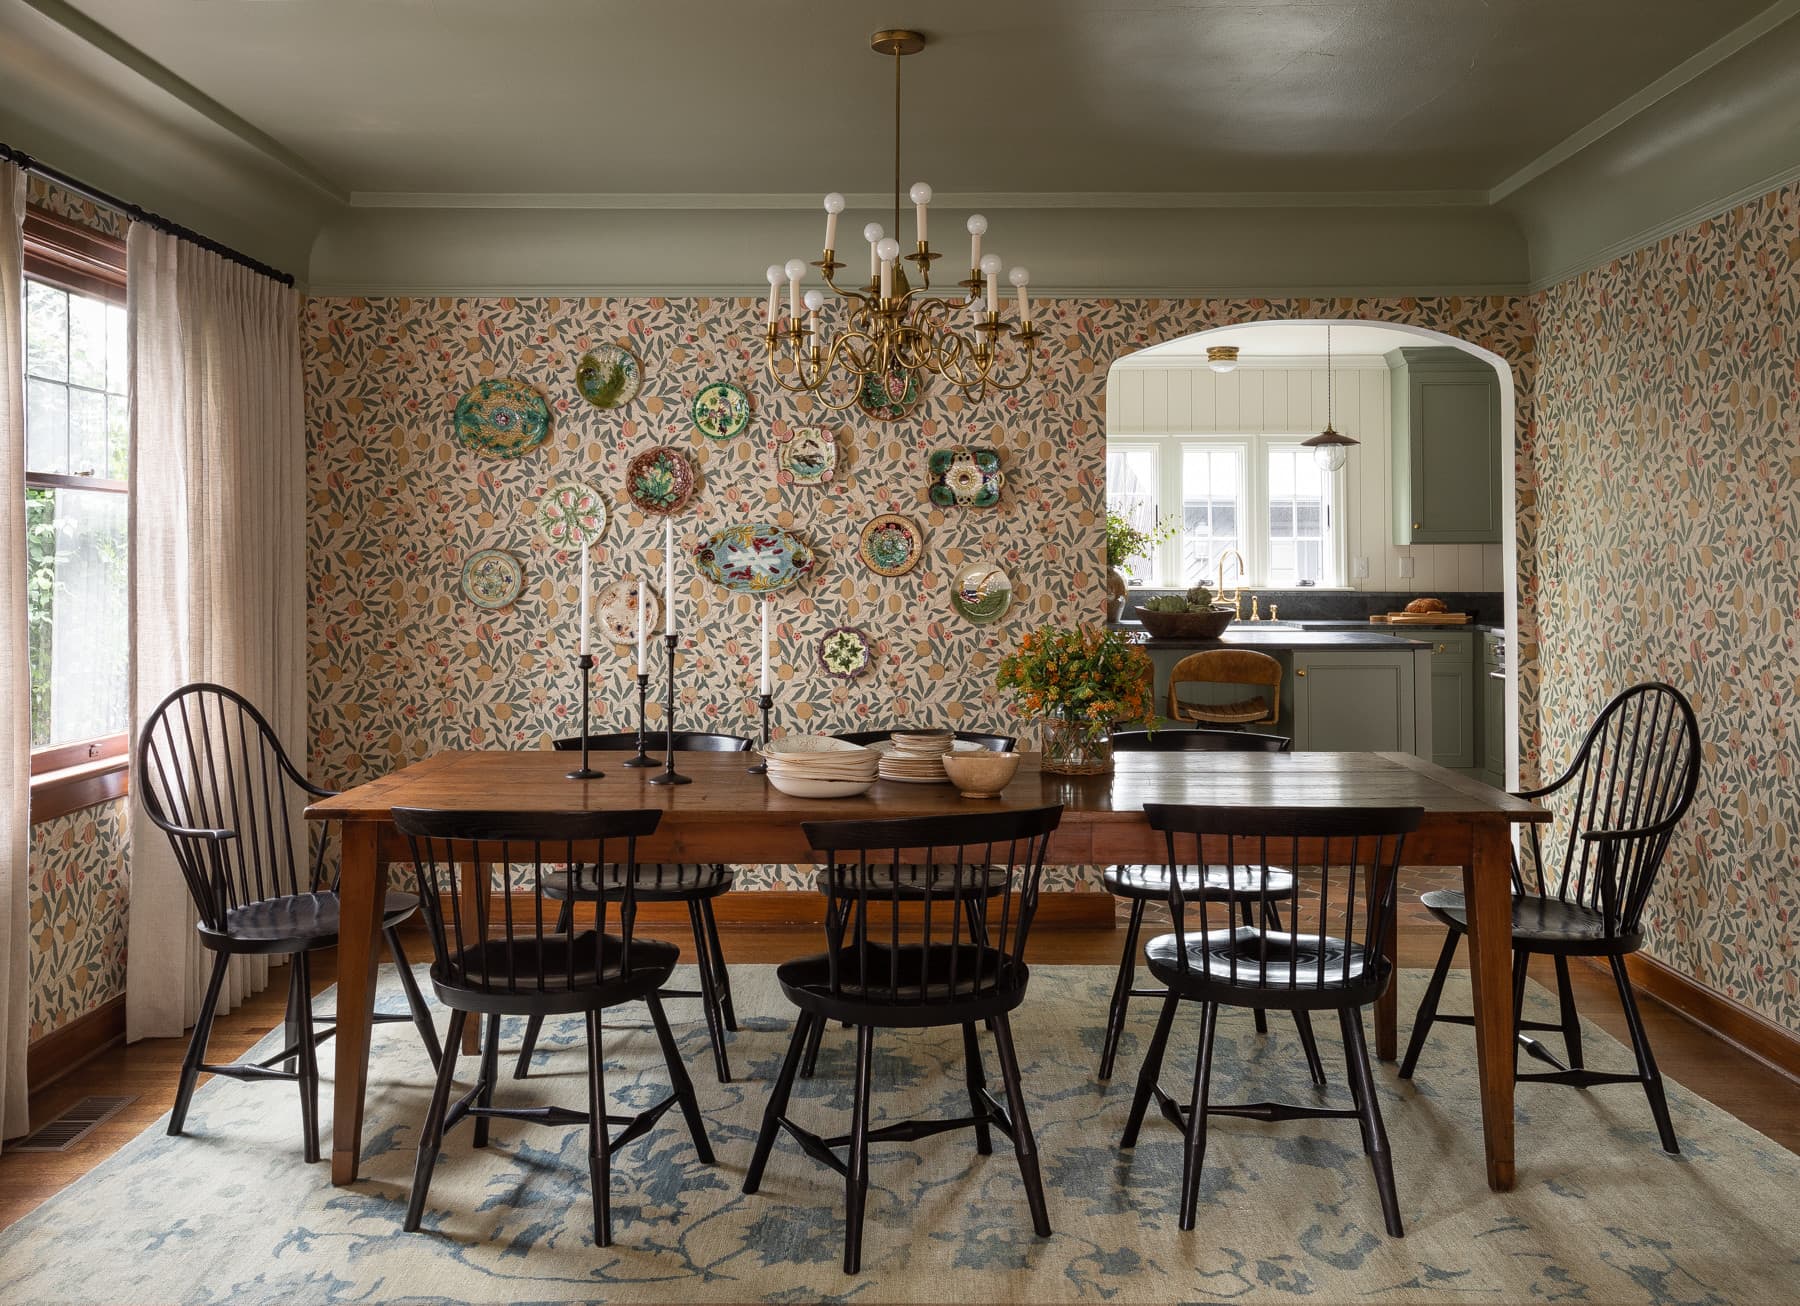 home tour featuring a dining room with showcasing a gallery wall with a vintage cottage decor